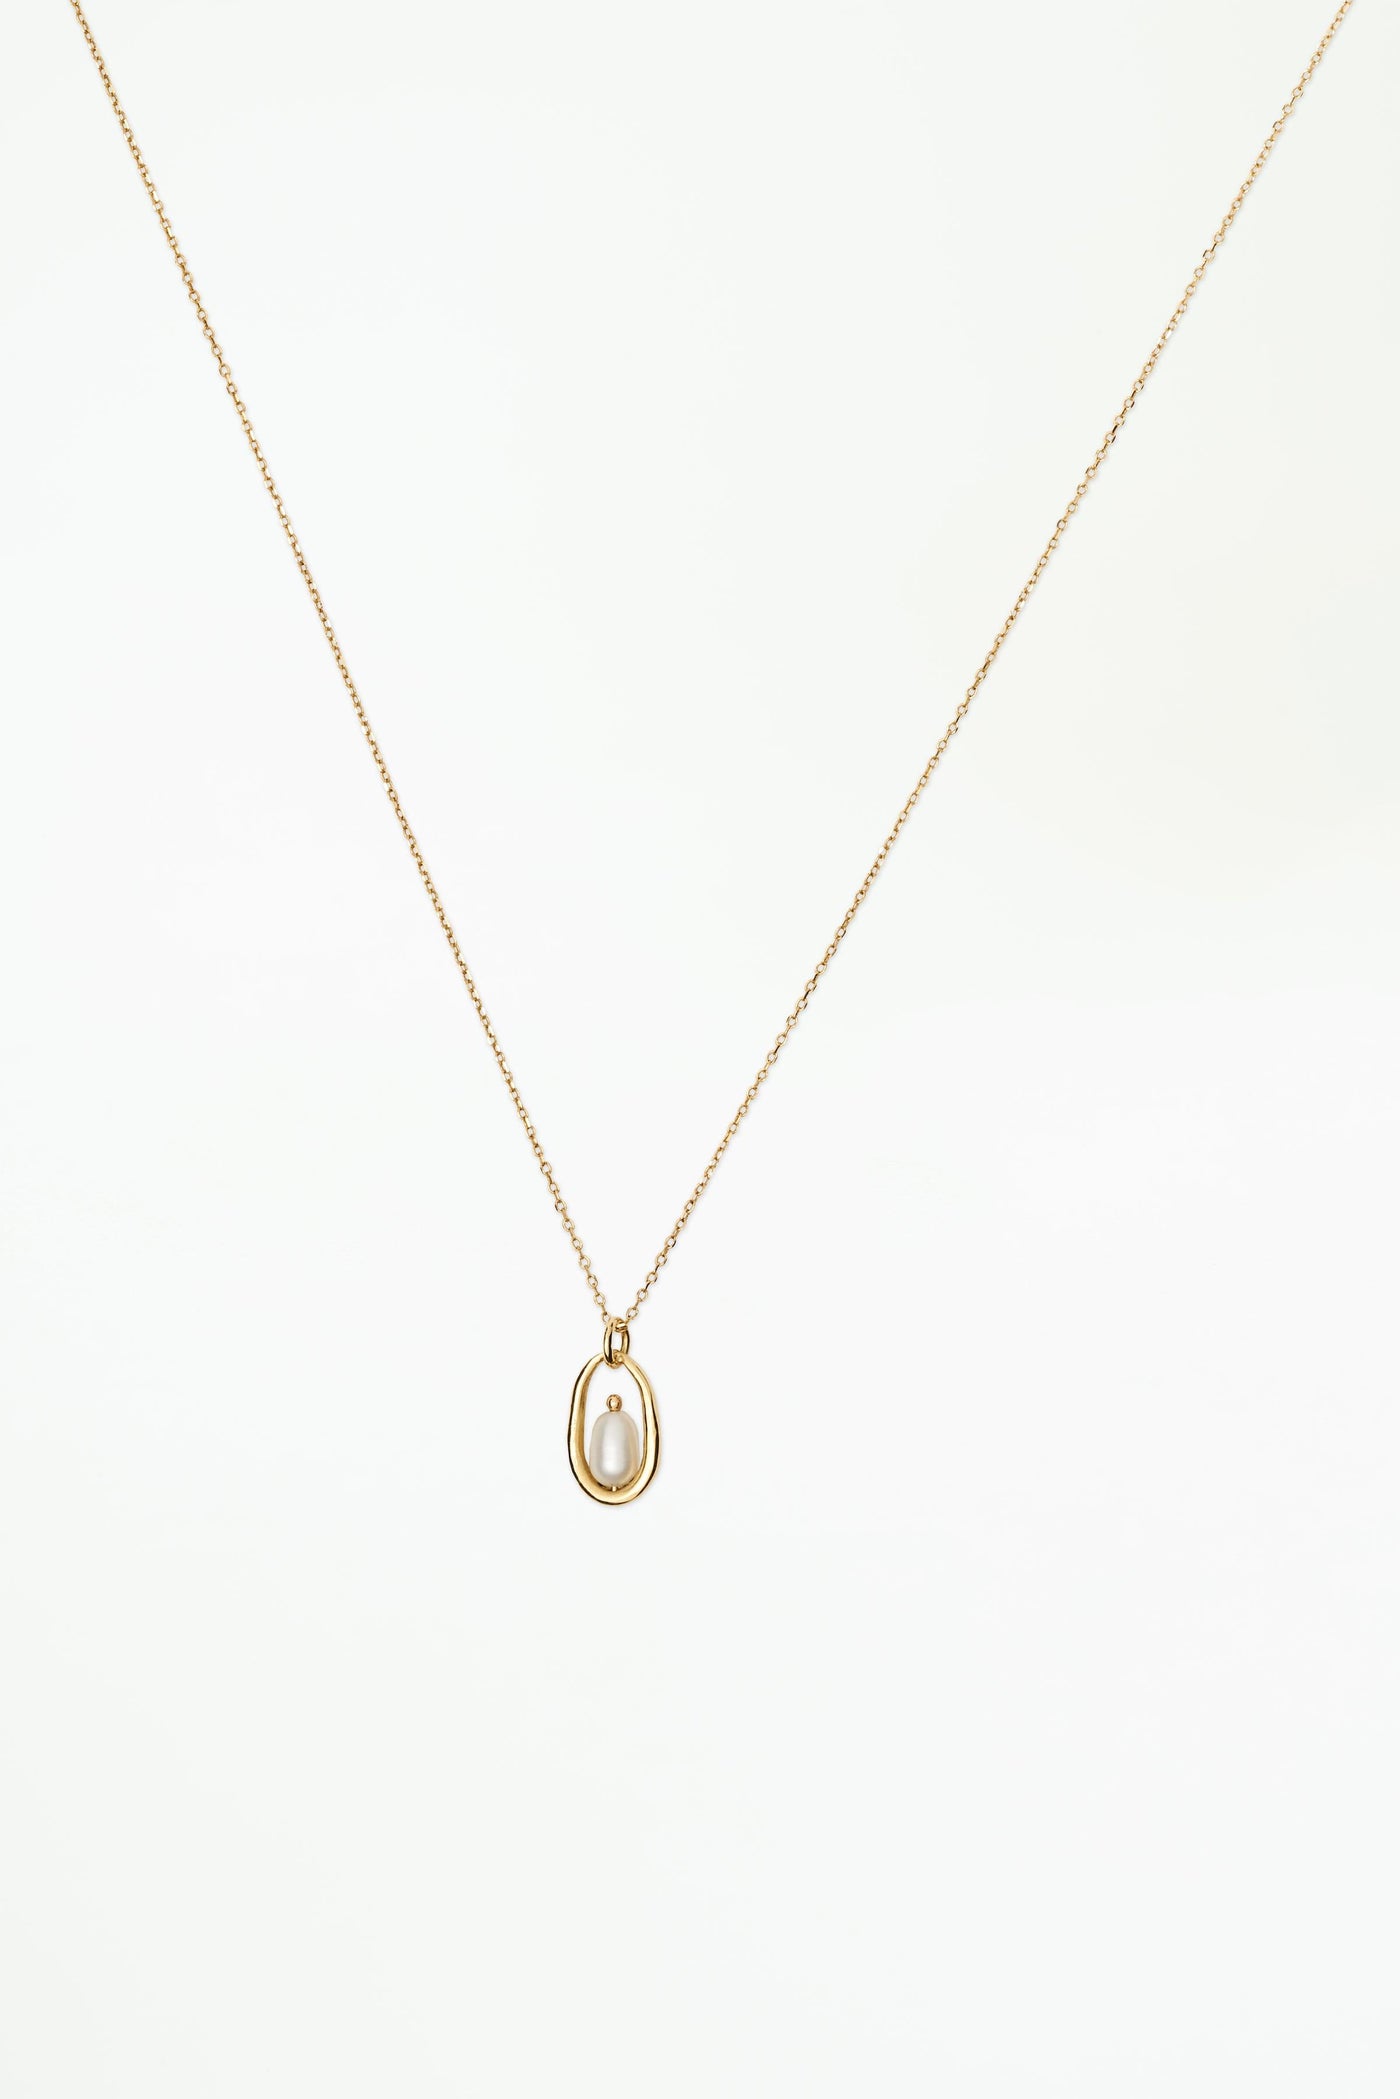 Pearl Droplet Necklace - WWAKE